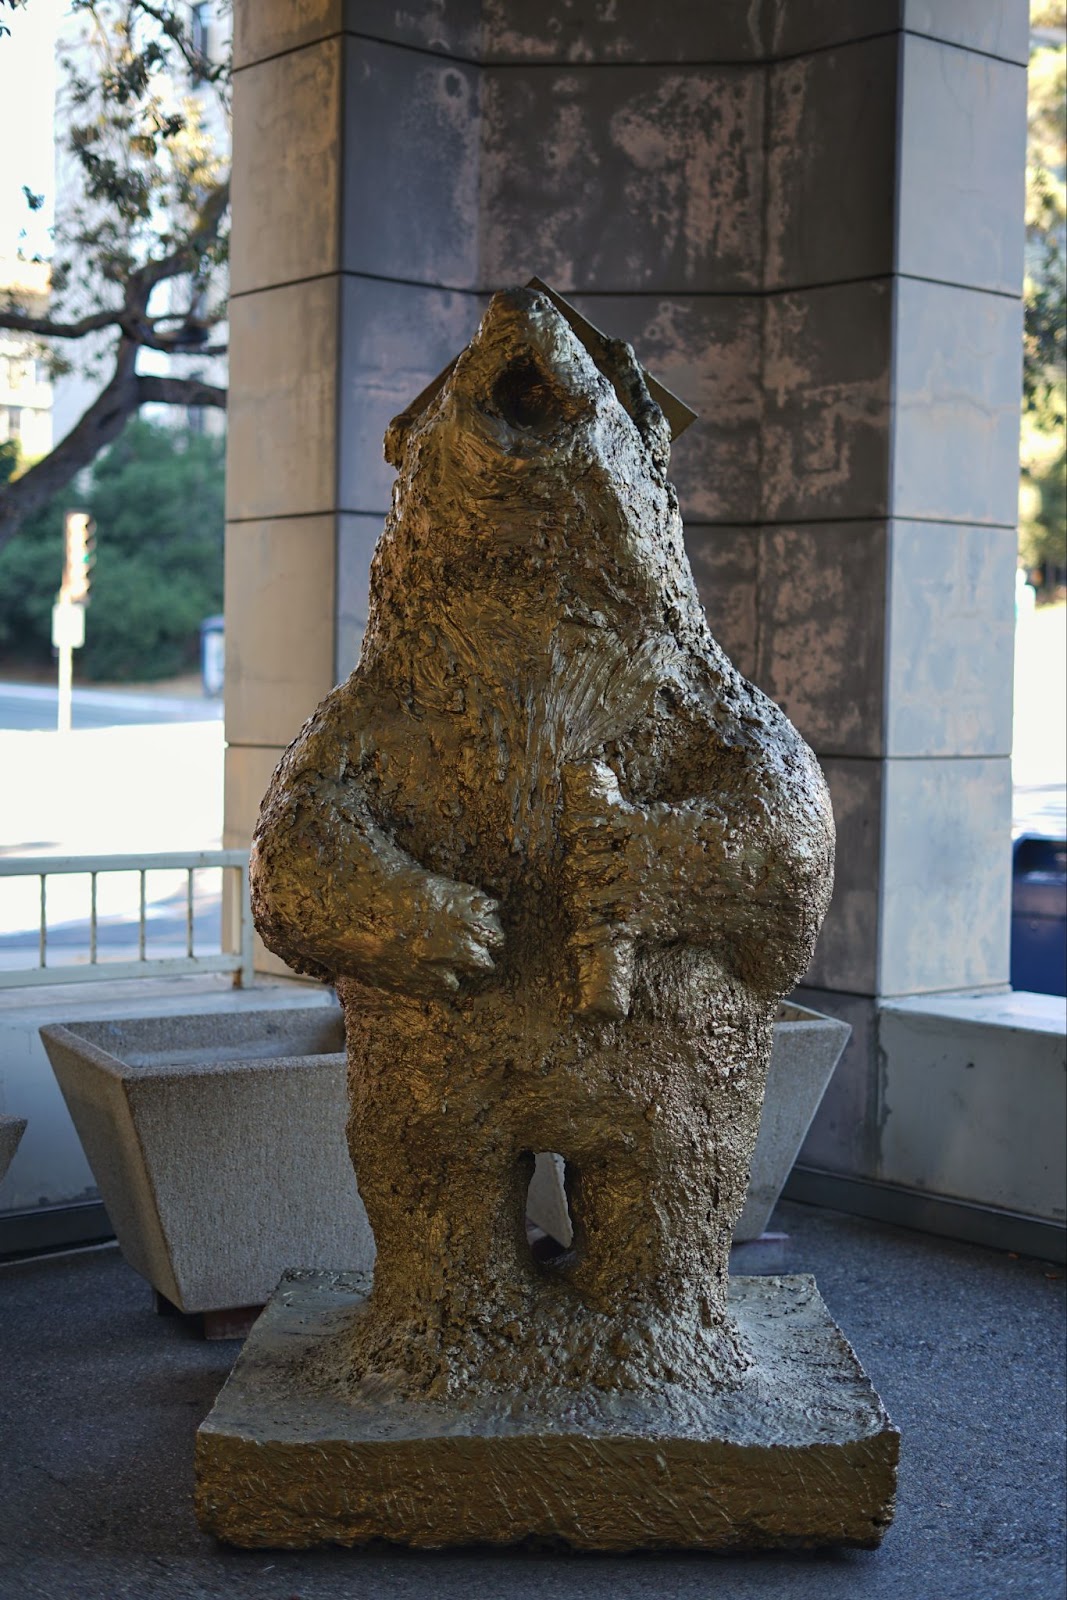 A bear statue, stading erect, seemingly howling, over a platform, while wearing a graduation cap and holding a diploma.